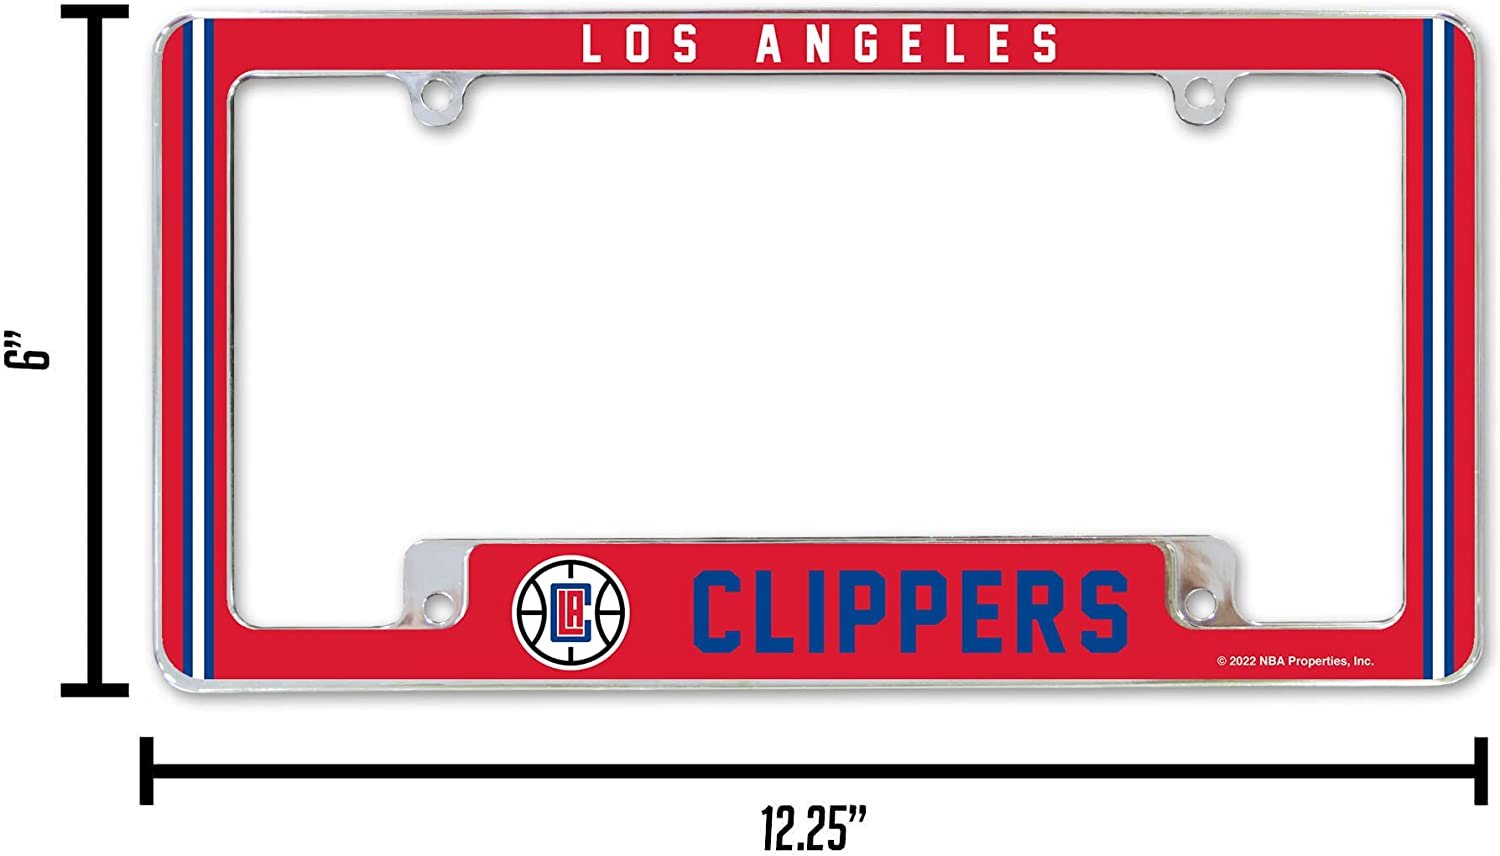 Los Angeles Clippers Metal License Plate Frame Chrome Tag Cover Alternate Design 6x12 Inch